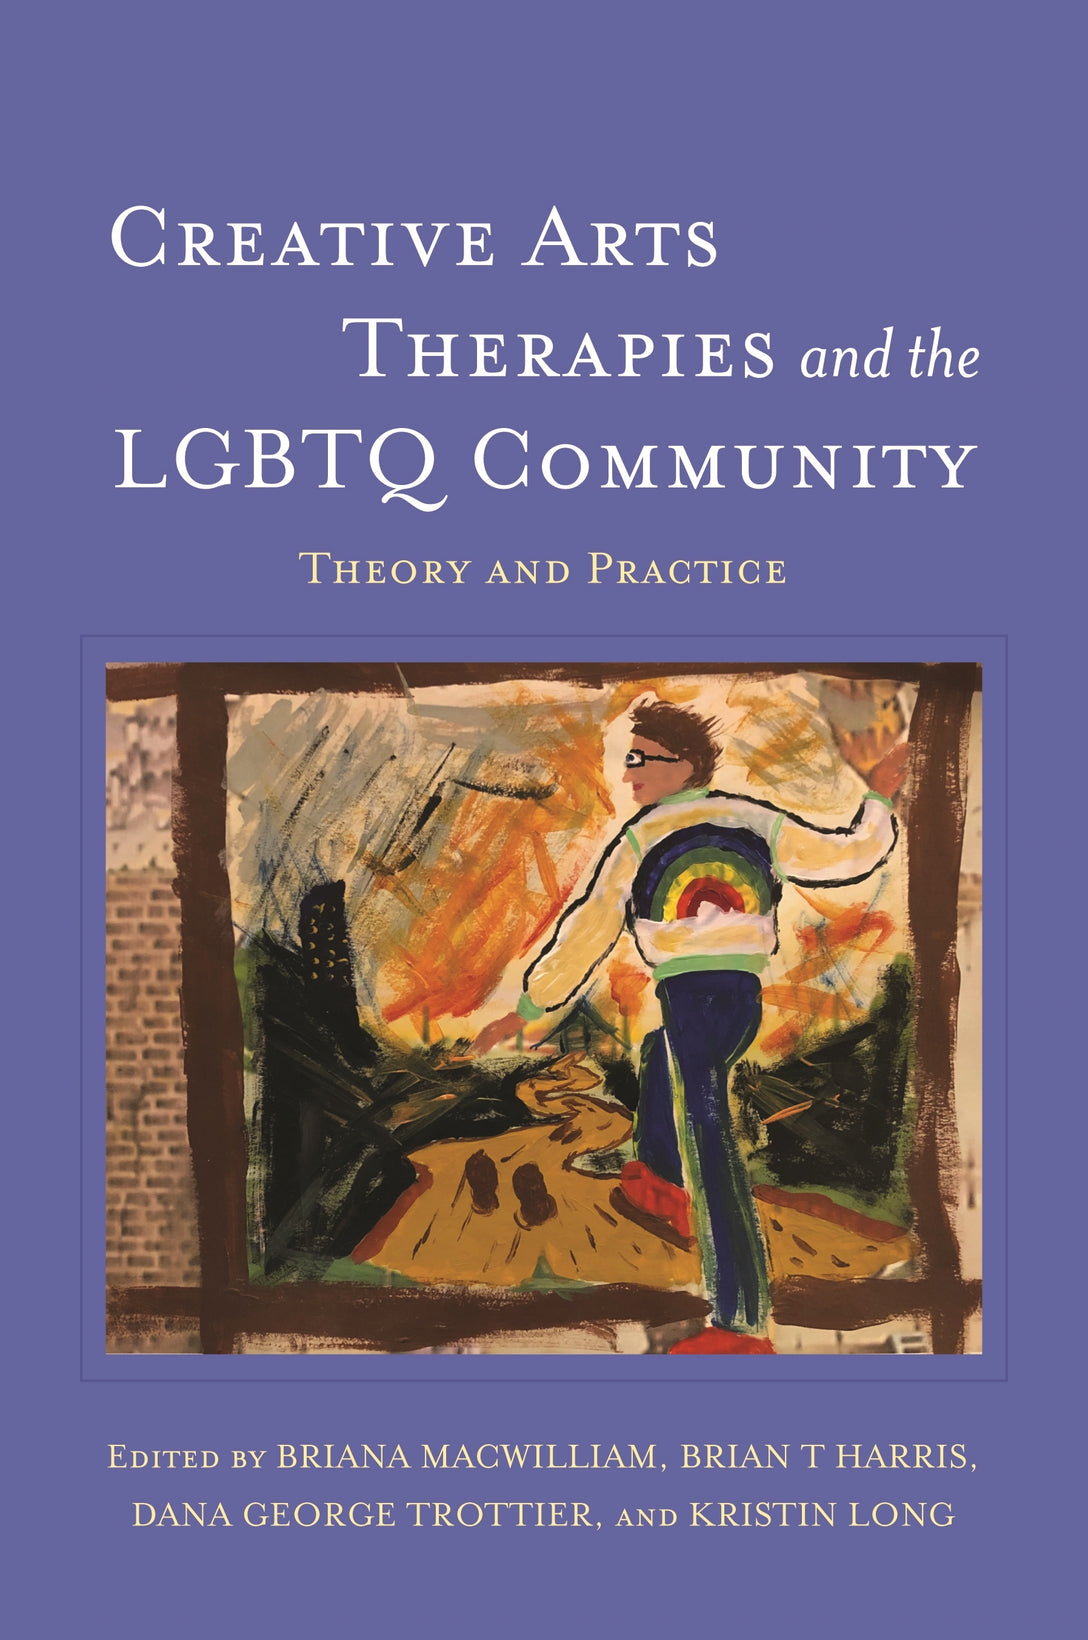 Creative Arts Therapies and the LGBTQ Community by Briana MacWilliam, Kristin Long, Dana George Trottier, Brian T Harris, No Author Listed